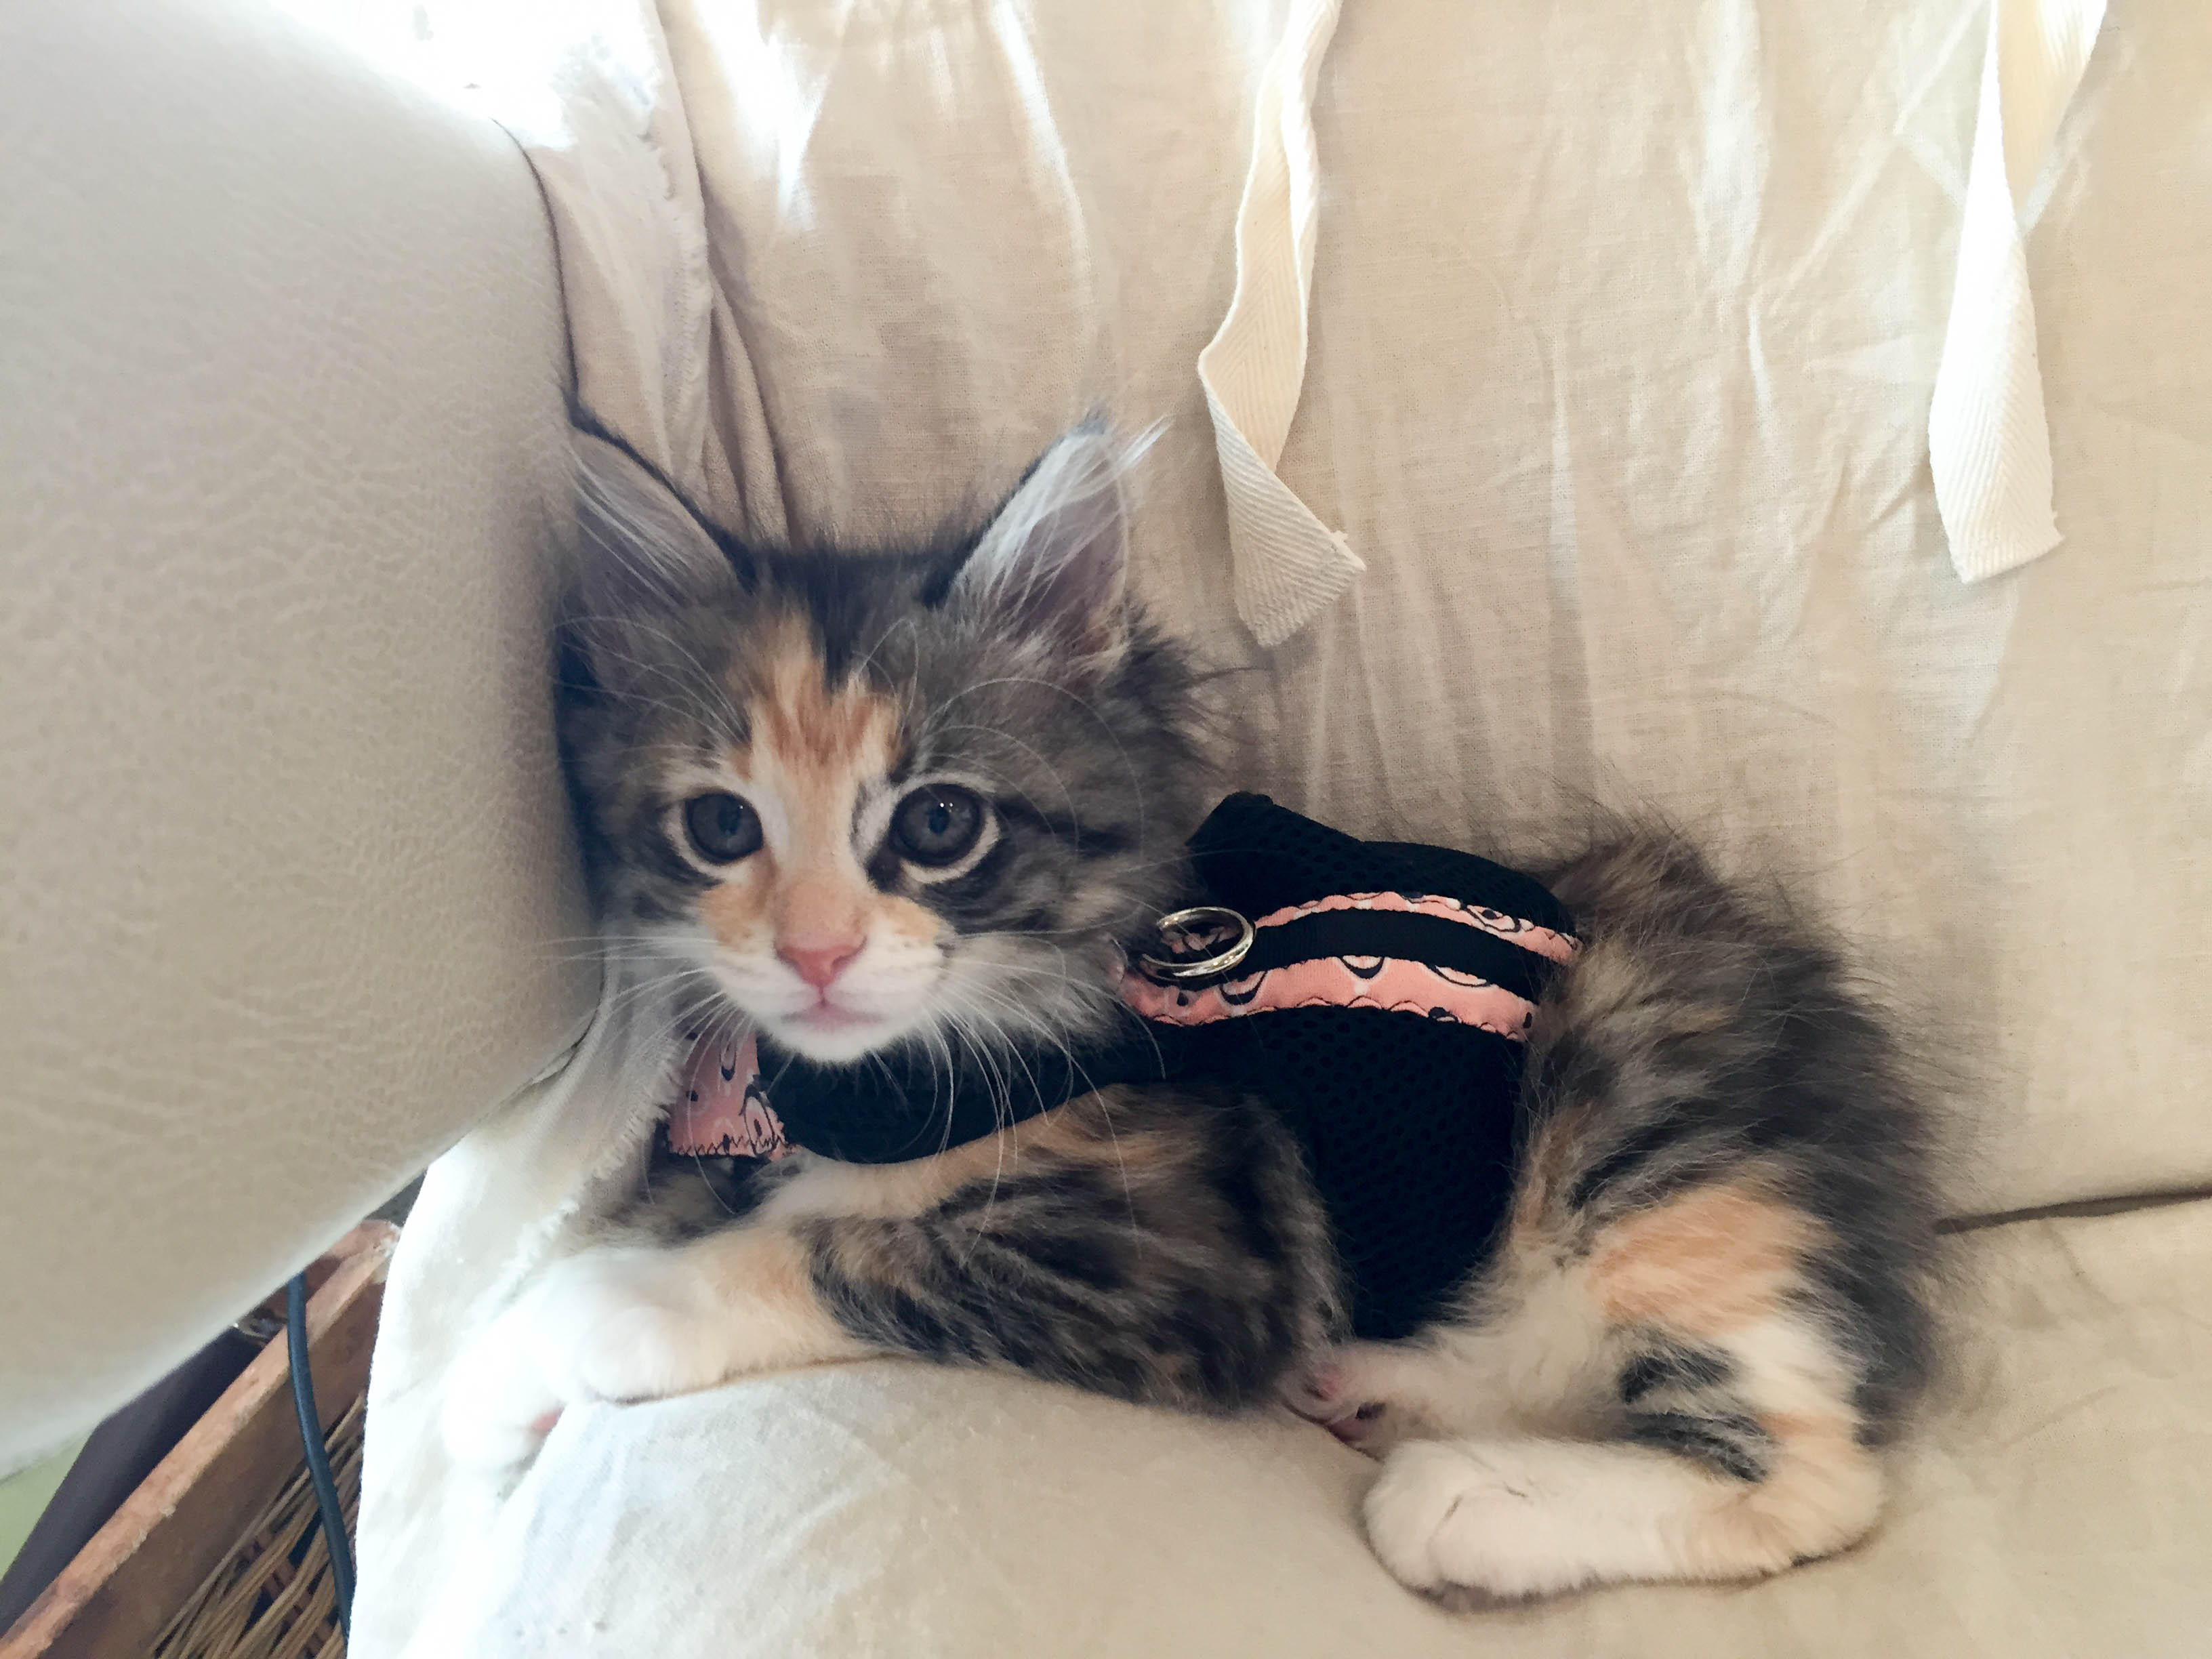 Kate refashioned this new harness for her.